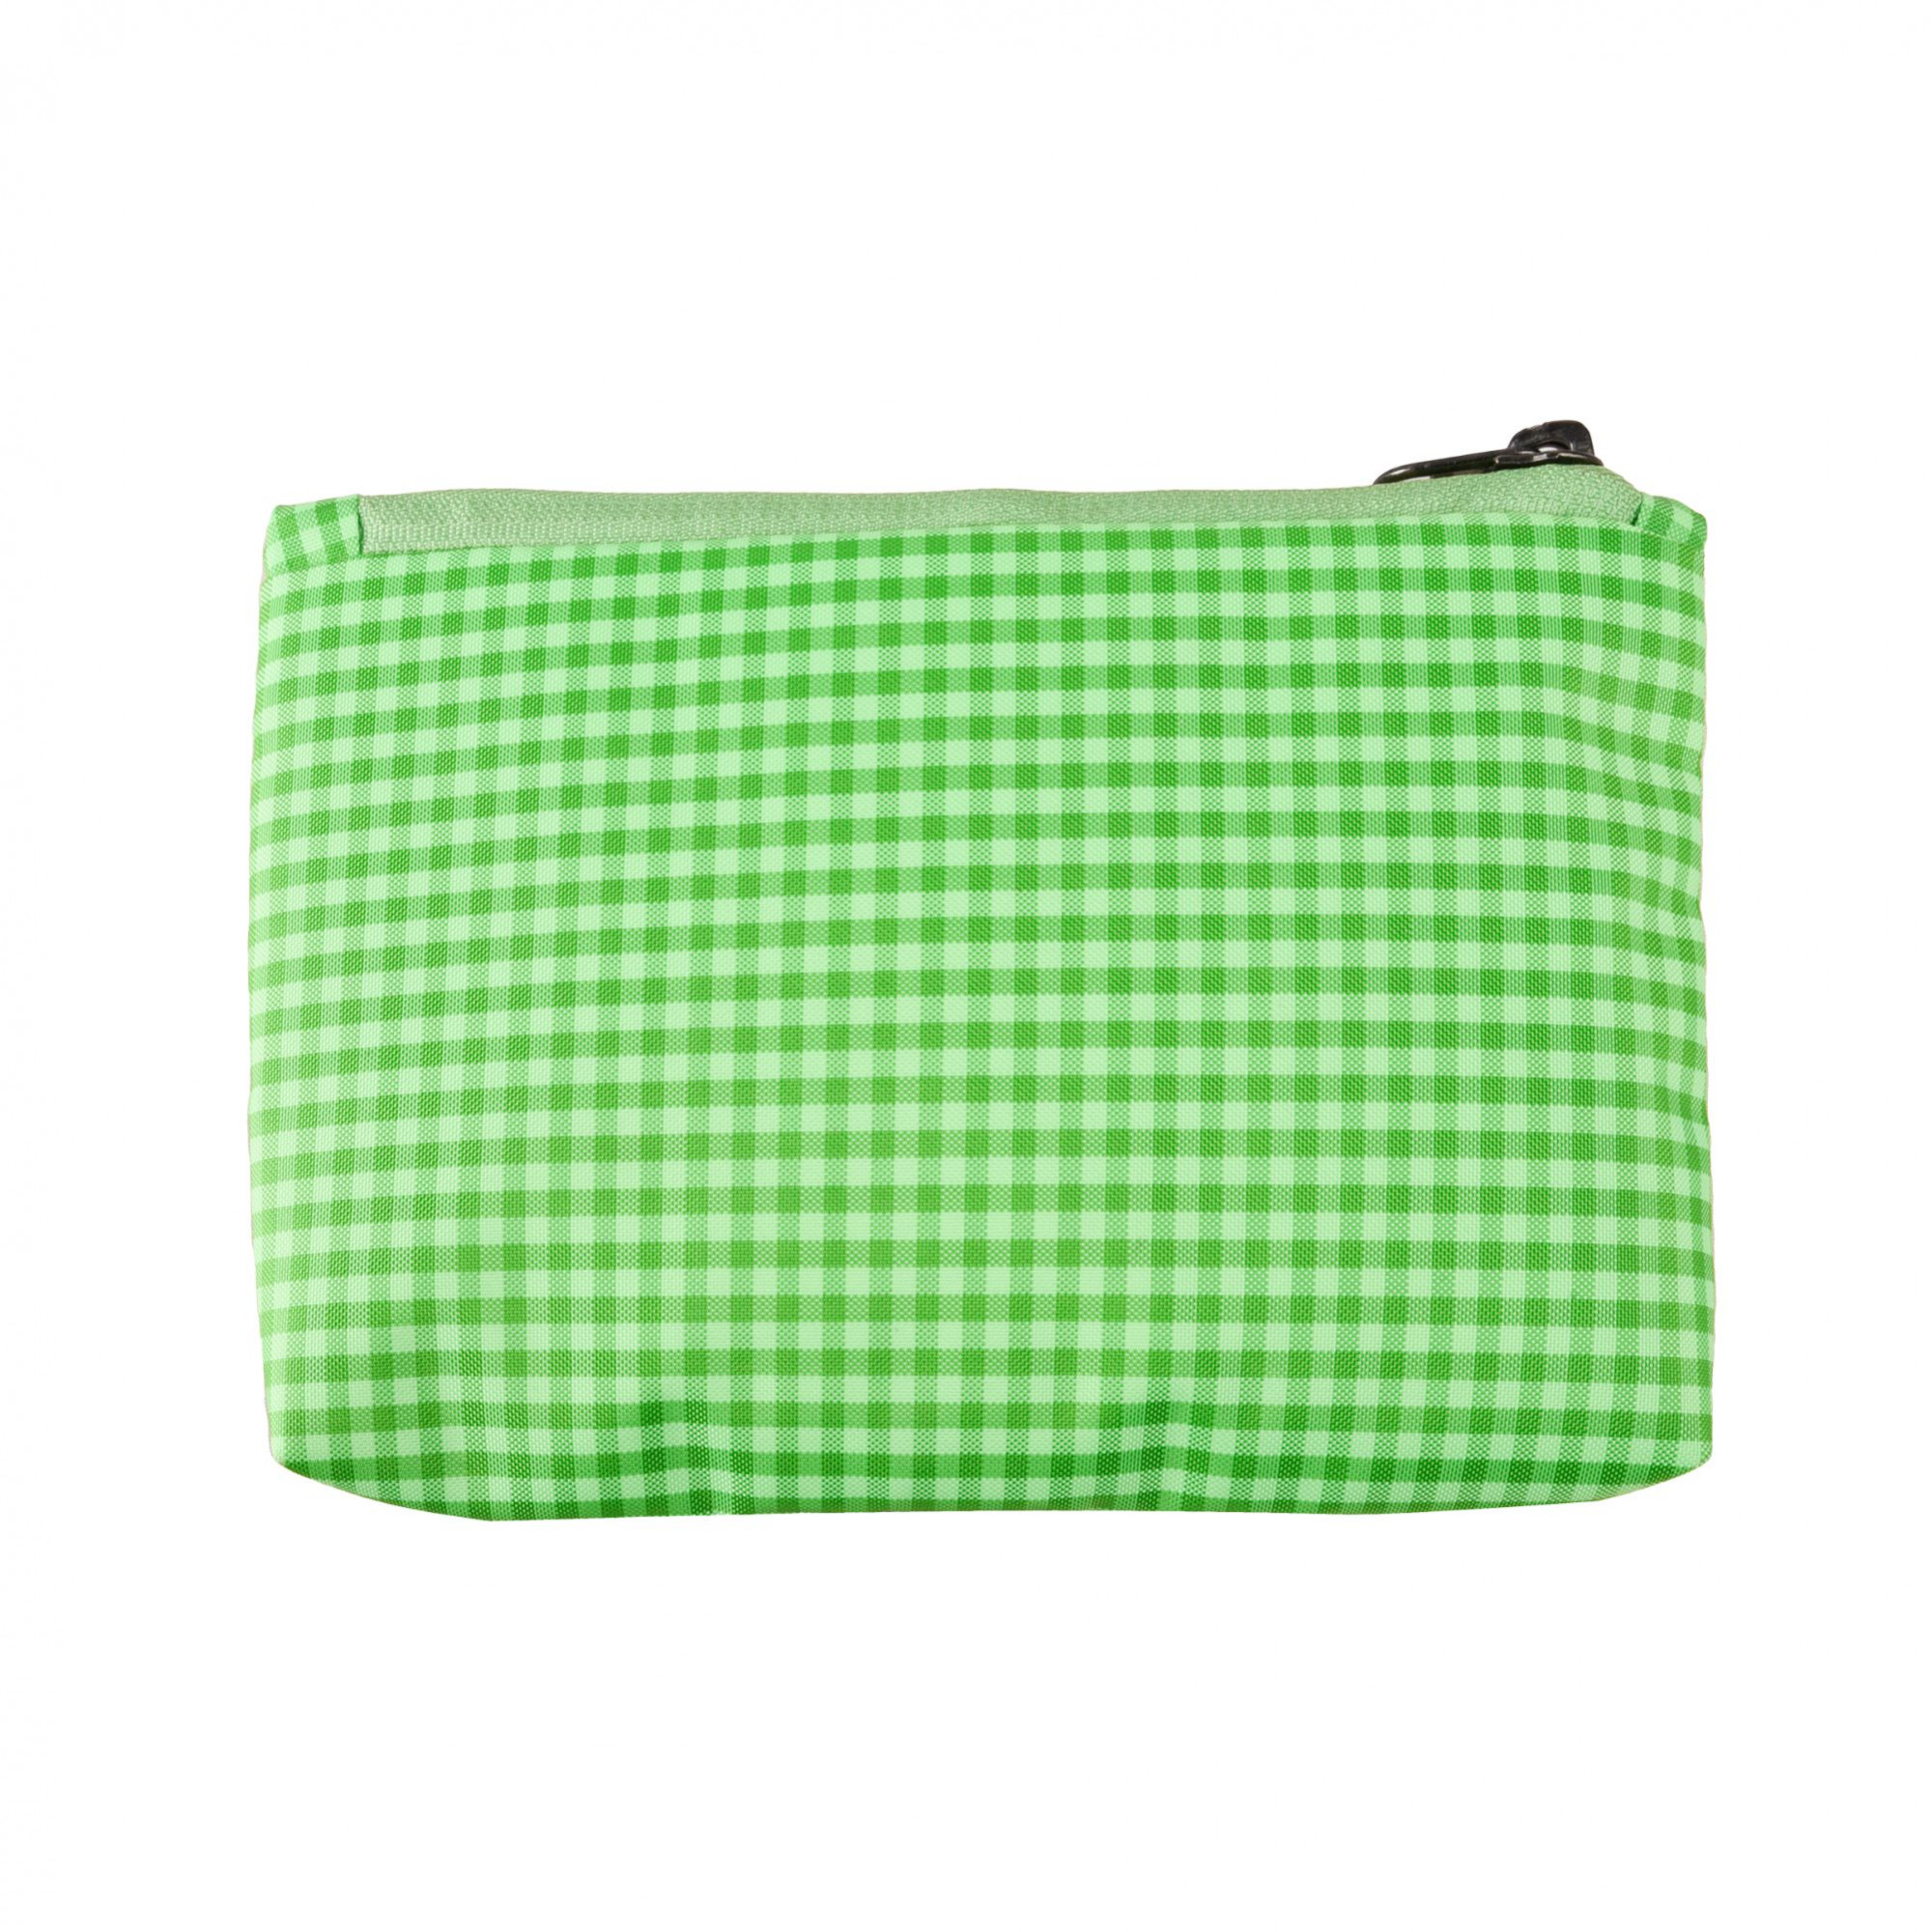 Kuber Industries Pencil Pouch | Square Stationary Pouch | Pen-Pencil Box for Kids | School Geometry Pouch | Pencil Utility Bag | Zipper Pencil Organizer | Green & Red